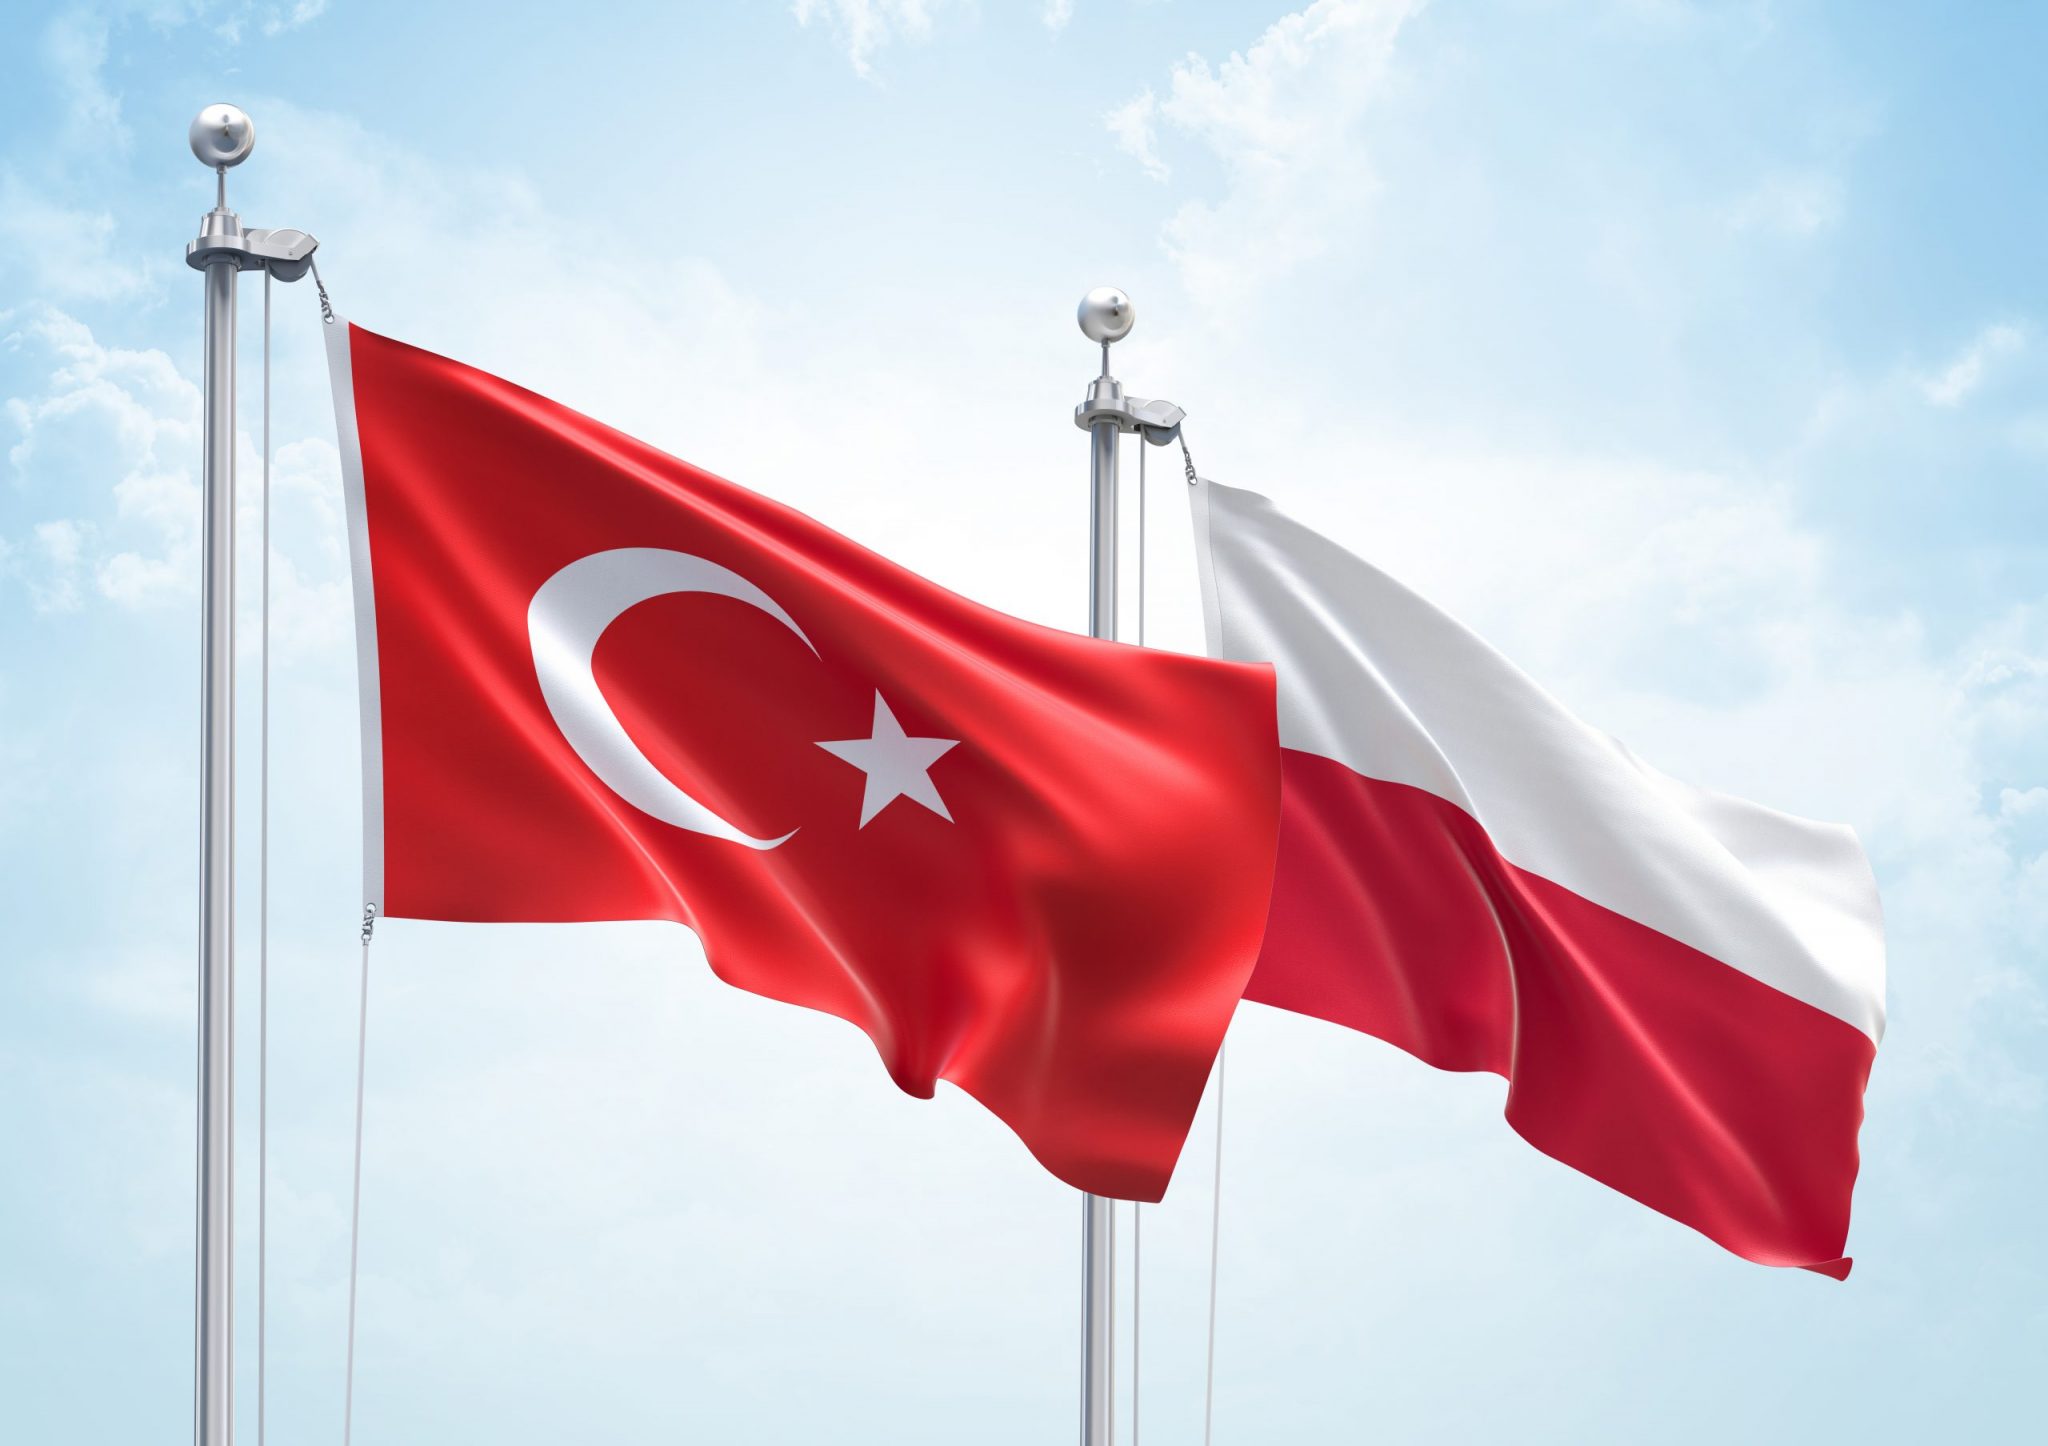 3D Rendering of Turkey & Poland Flags are Waving in the Sky